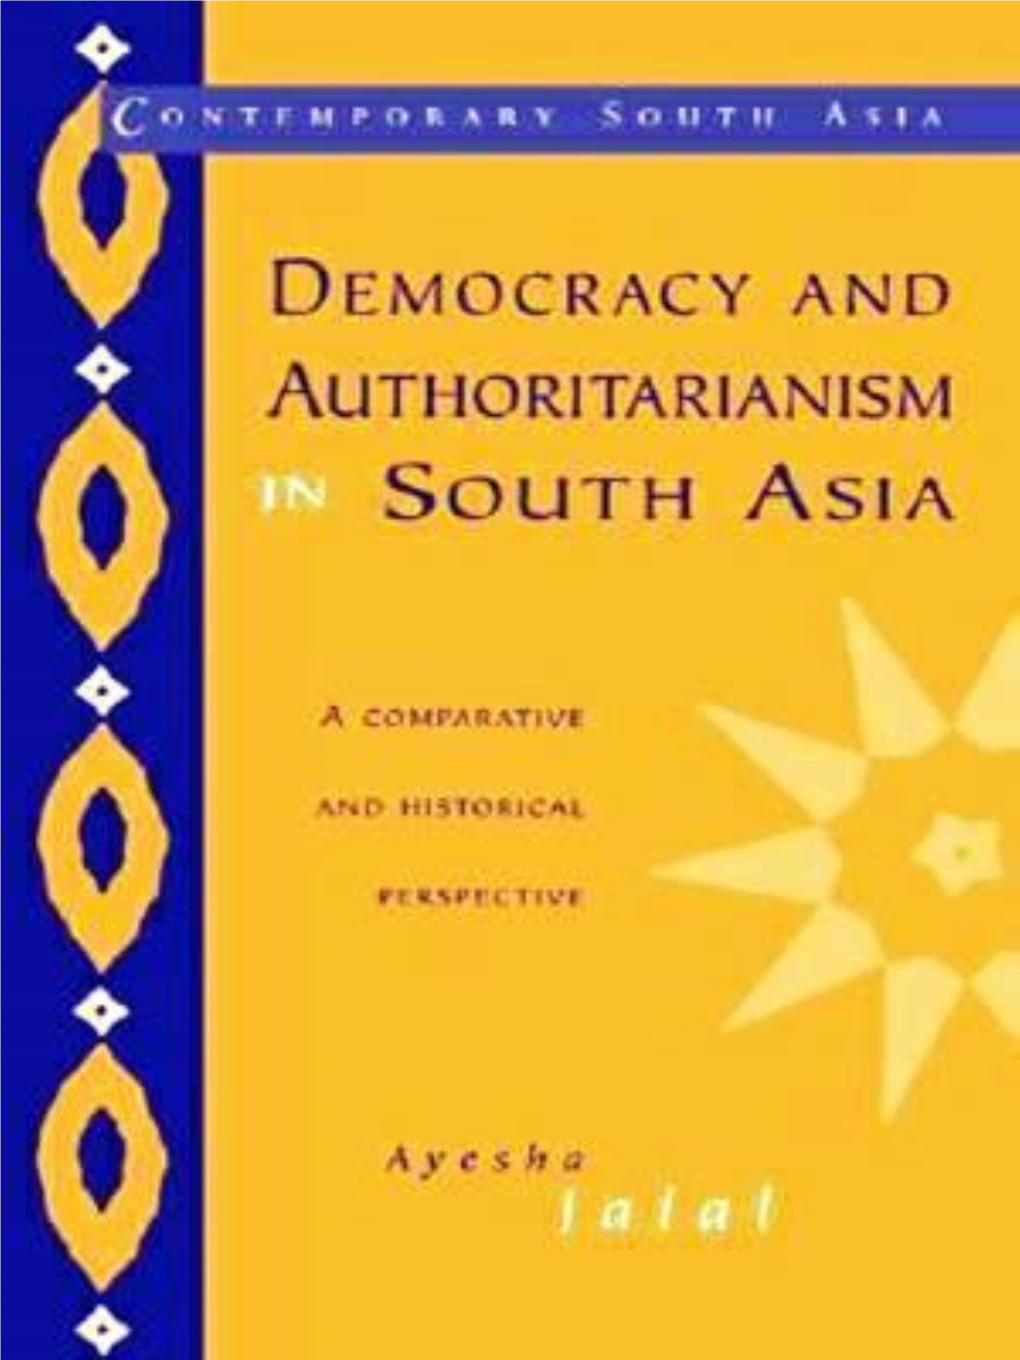 Democracy and Authoritarianism in South Asia by Ayesha Jalal Ver1.Pdf